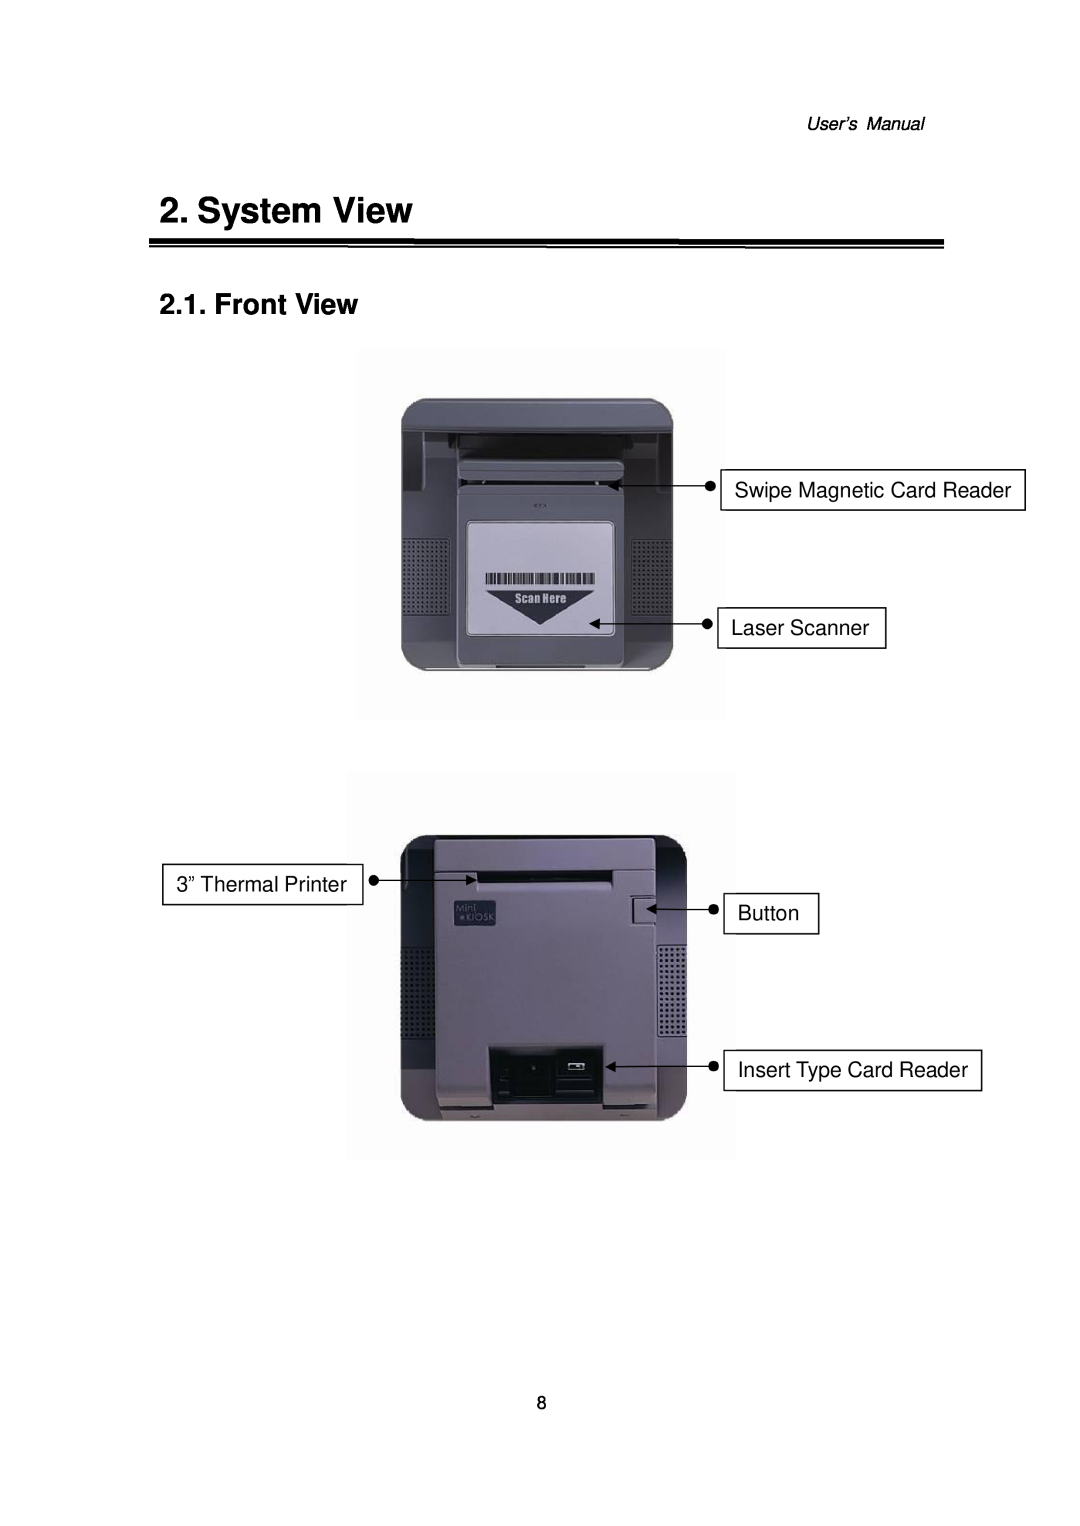 Intel 48201201, Kiosk Hardware System user manual System View, Front View, User’s Manual 